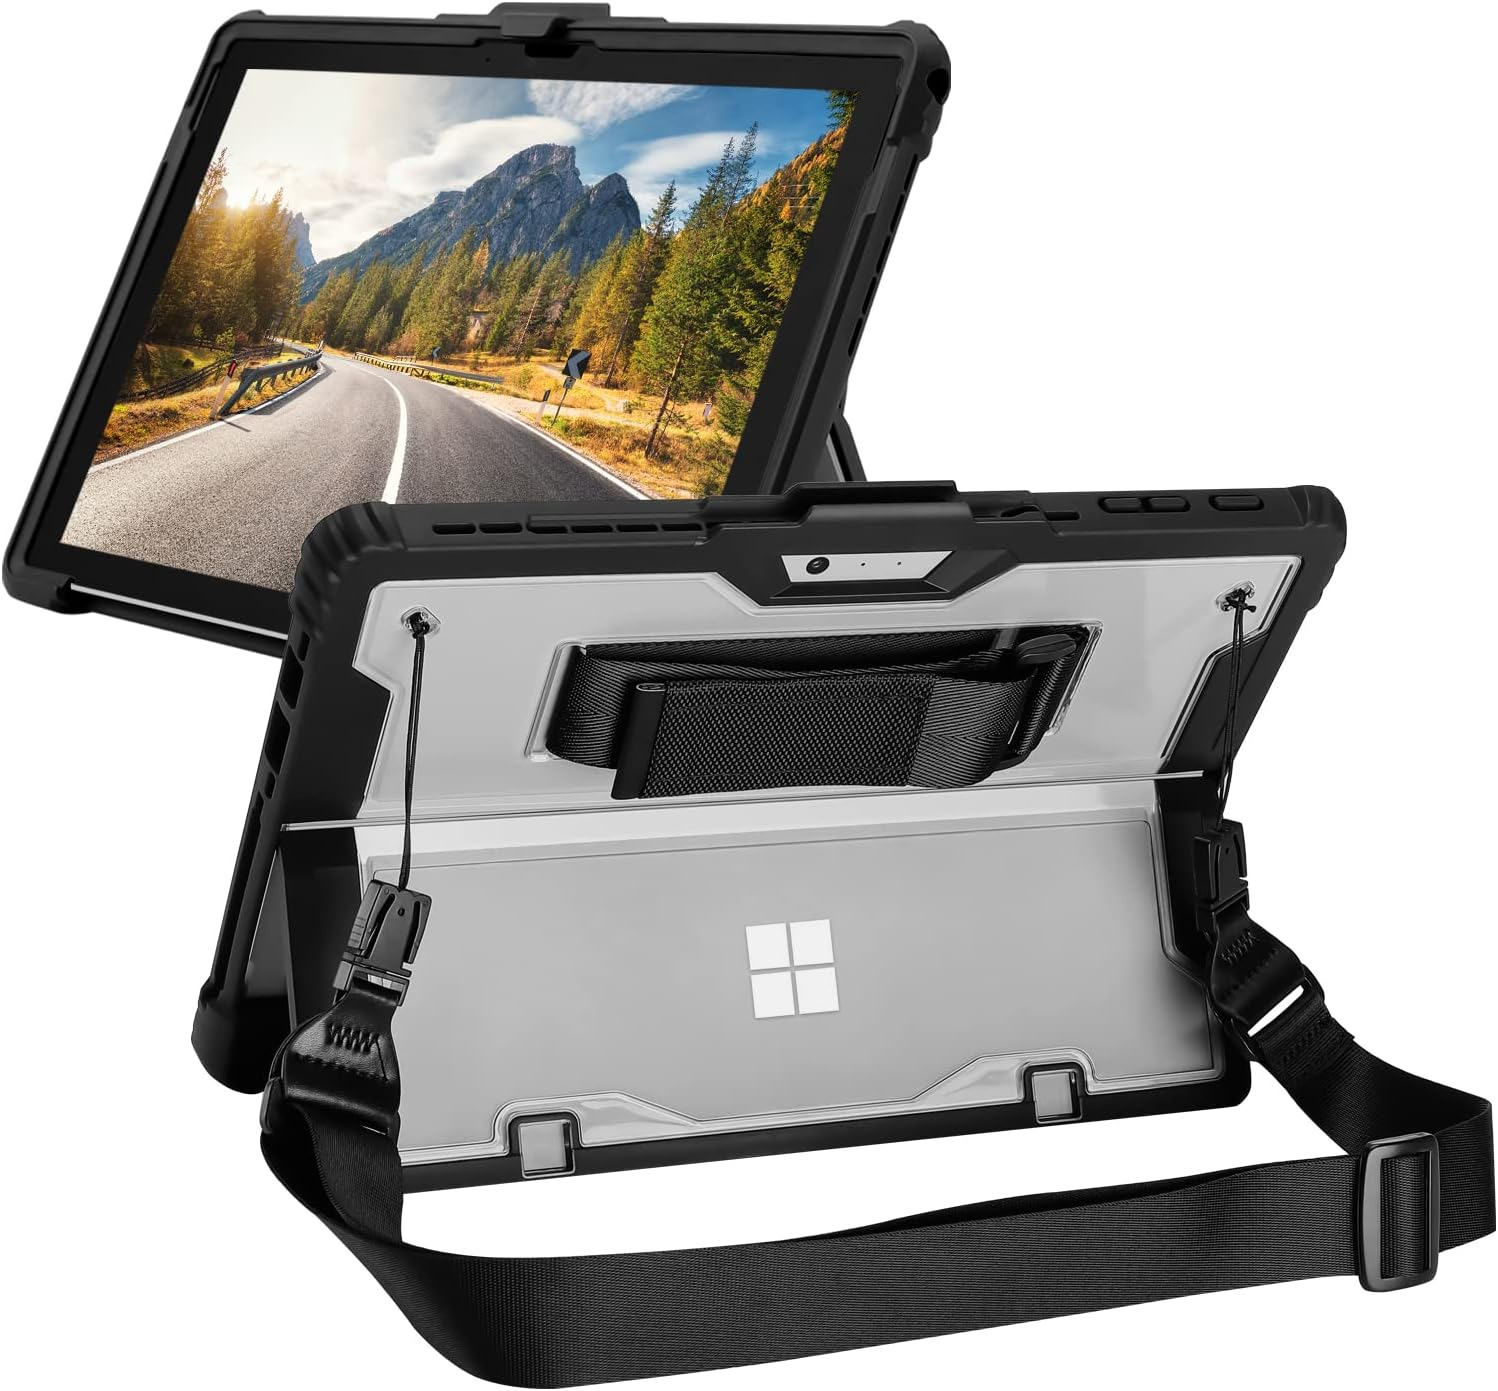 Rugged Case for Surface Pro, Shoulder & Hand Strap, Type Cover Compatible, Black